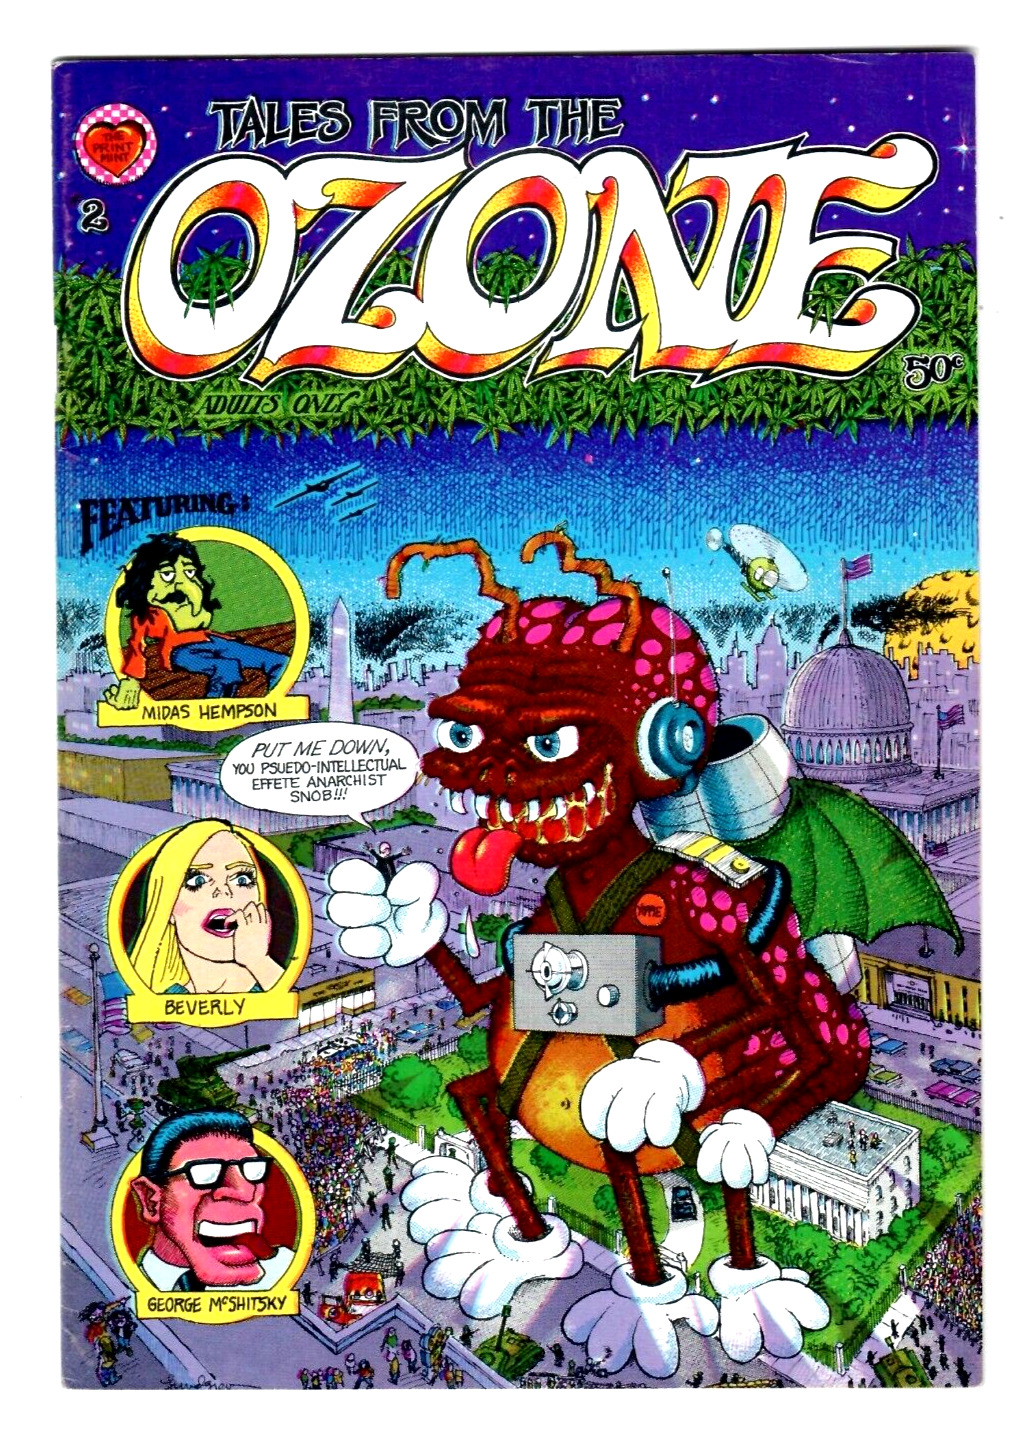 TALES FROM THE OZONE #2 Dave Sheridan, 1970 Underground 1rst Print, Fine 6.0